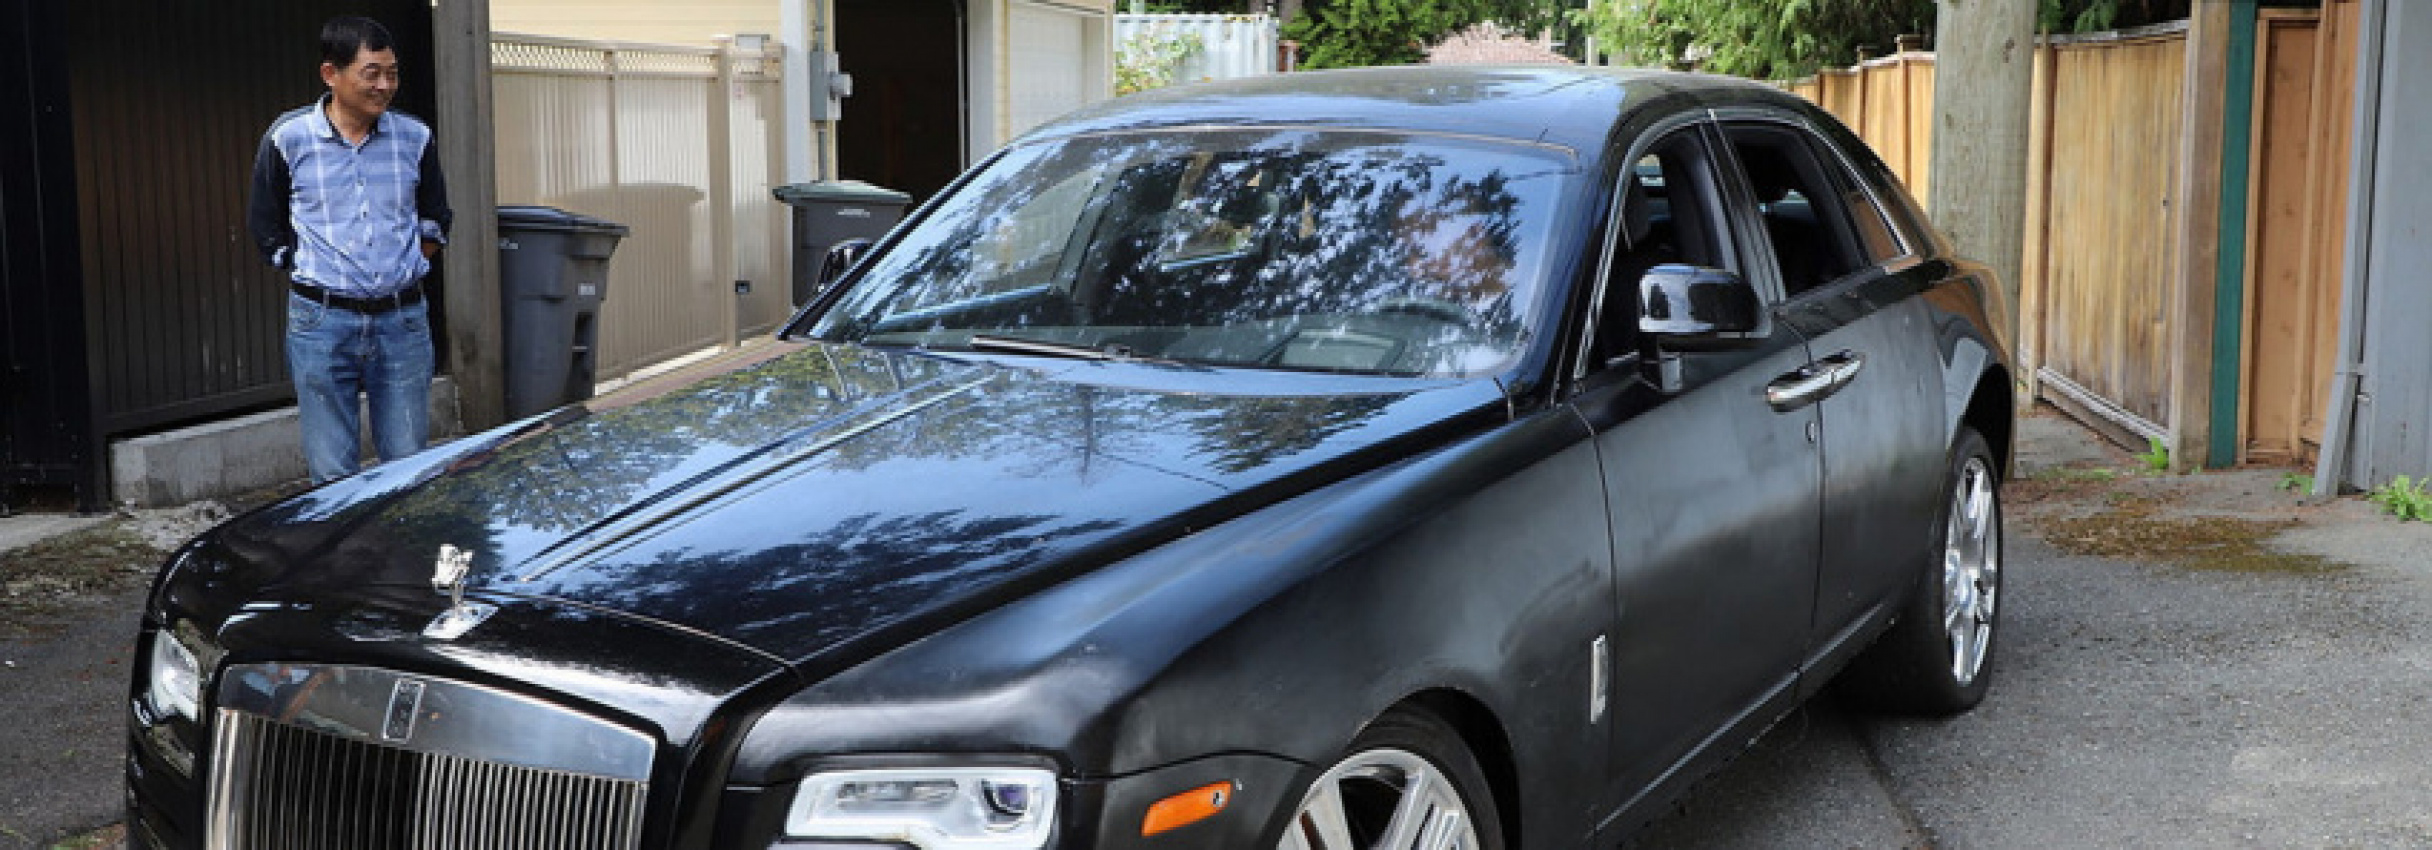 autos, cars, news, rolls-royce, electric vehicles, electromod, rolls royce videos, rolls royce wraith, tuning, video, canadian businessman sells house to fund his own rolls-royce wraith electromod project